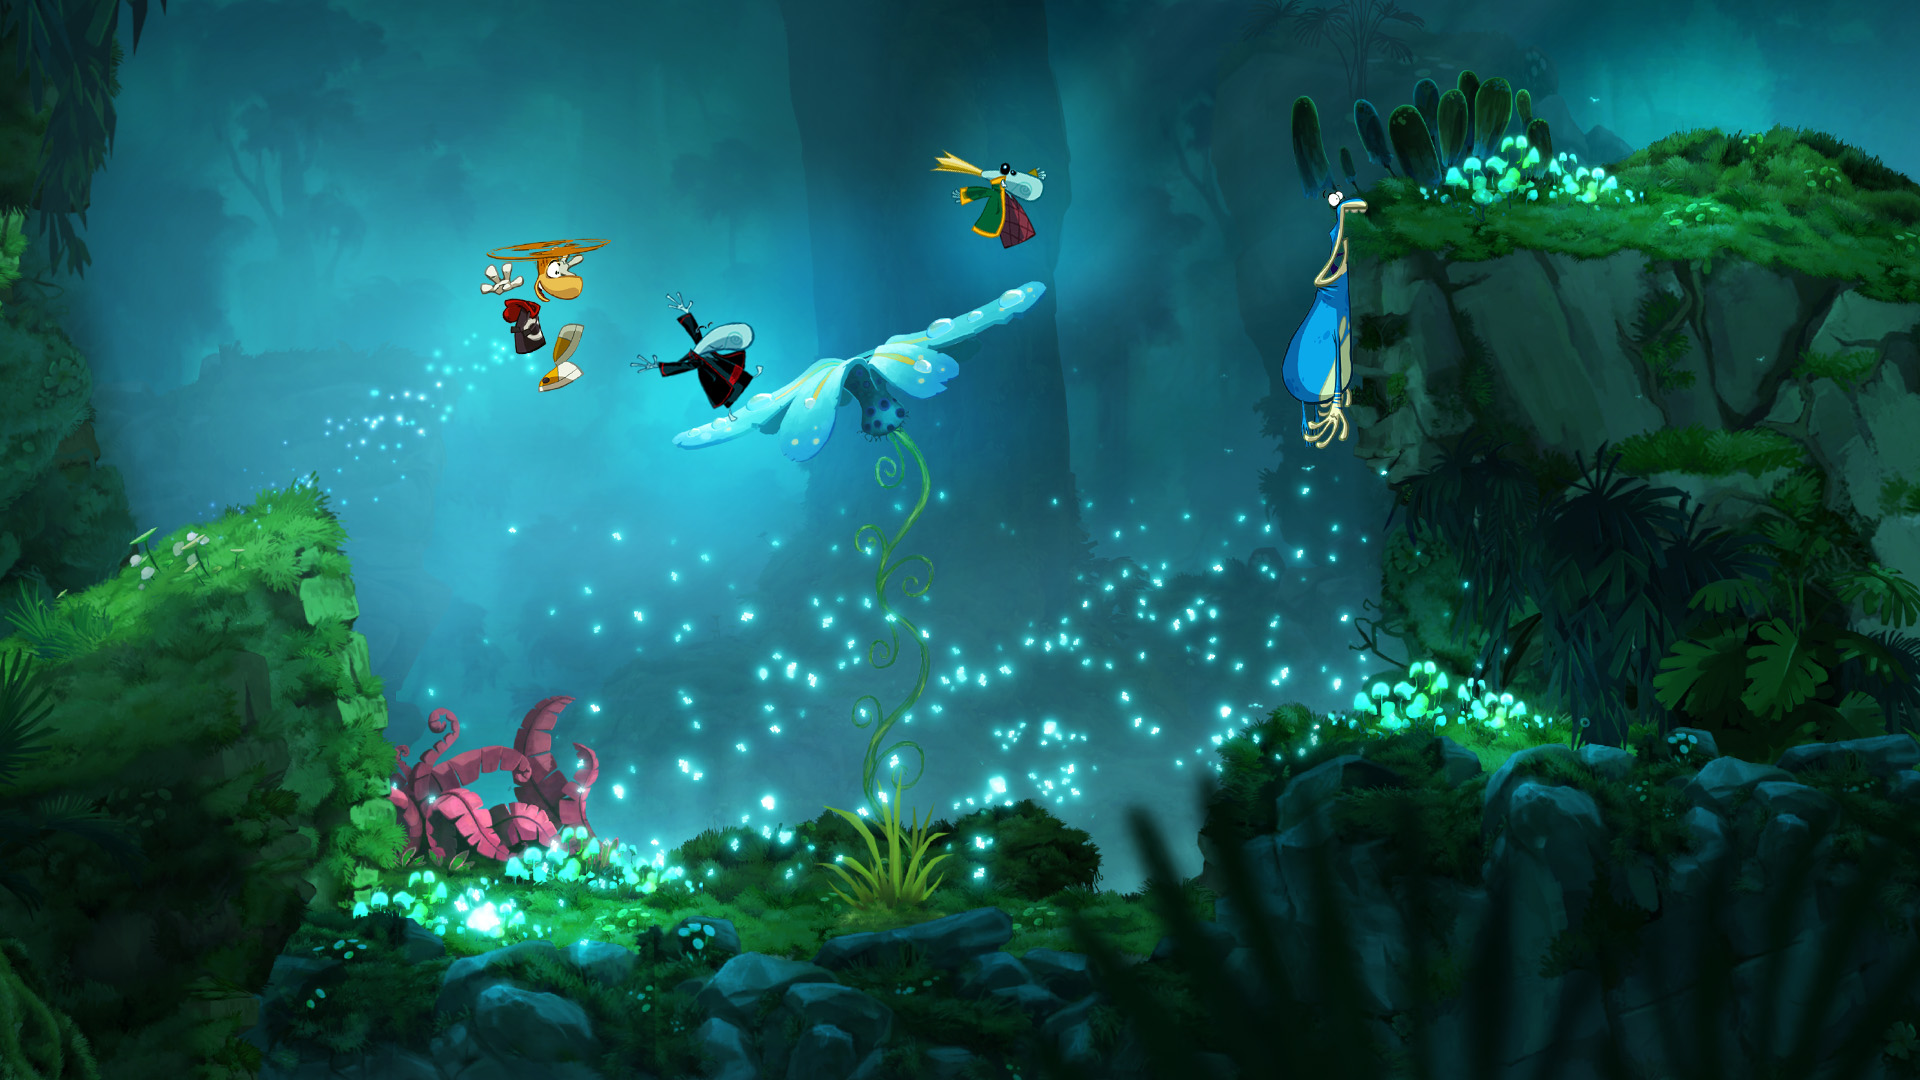 Buy Rayman® Origins from the Humble Store